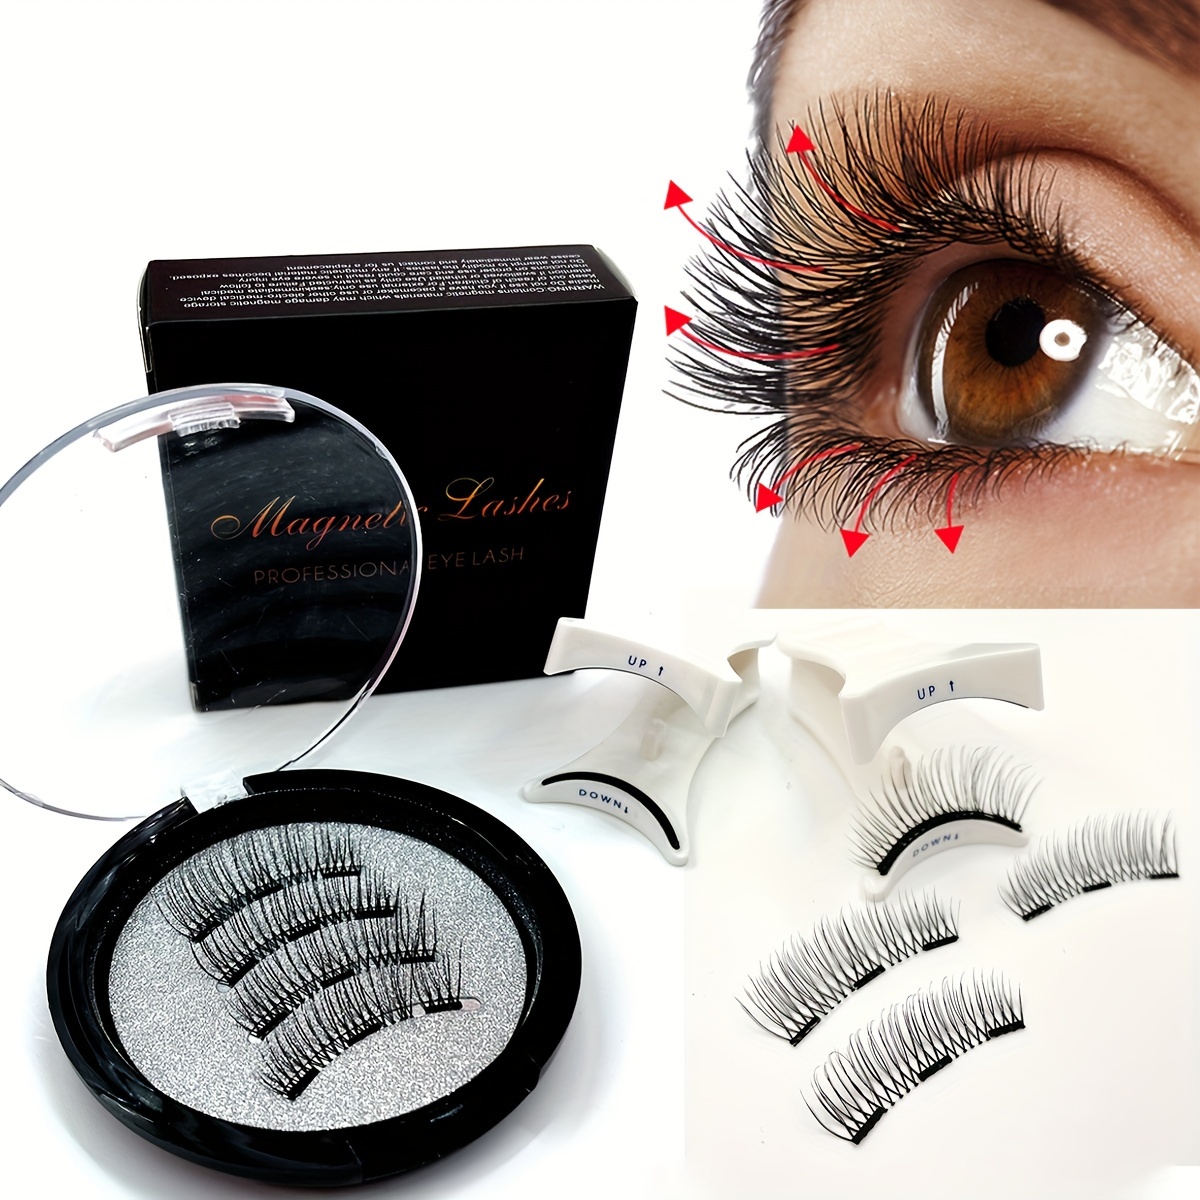 

Magnetic Eyelashes Kit - 1 Pair, Reusable & Natural Look With Curved Design, Wispy Long Lashes, Easy-to-apply Magnet Technology